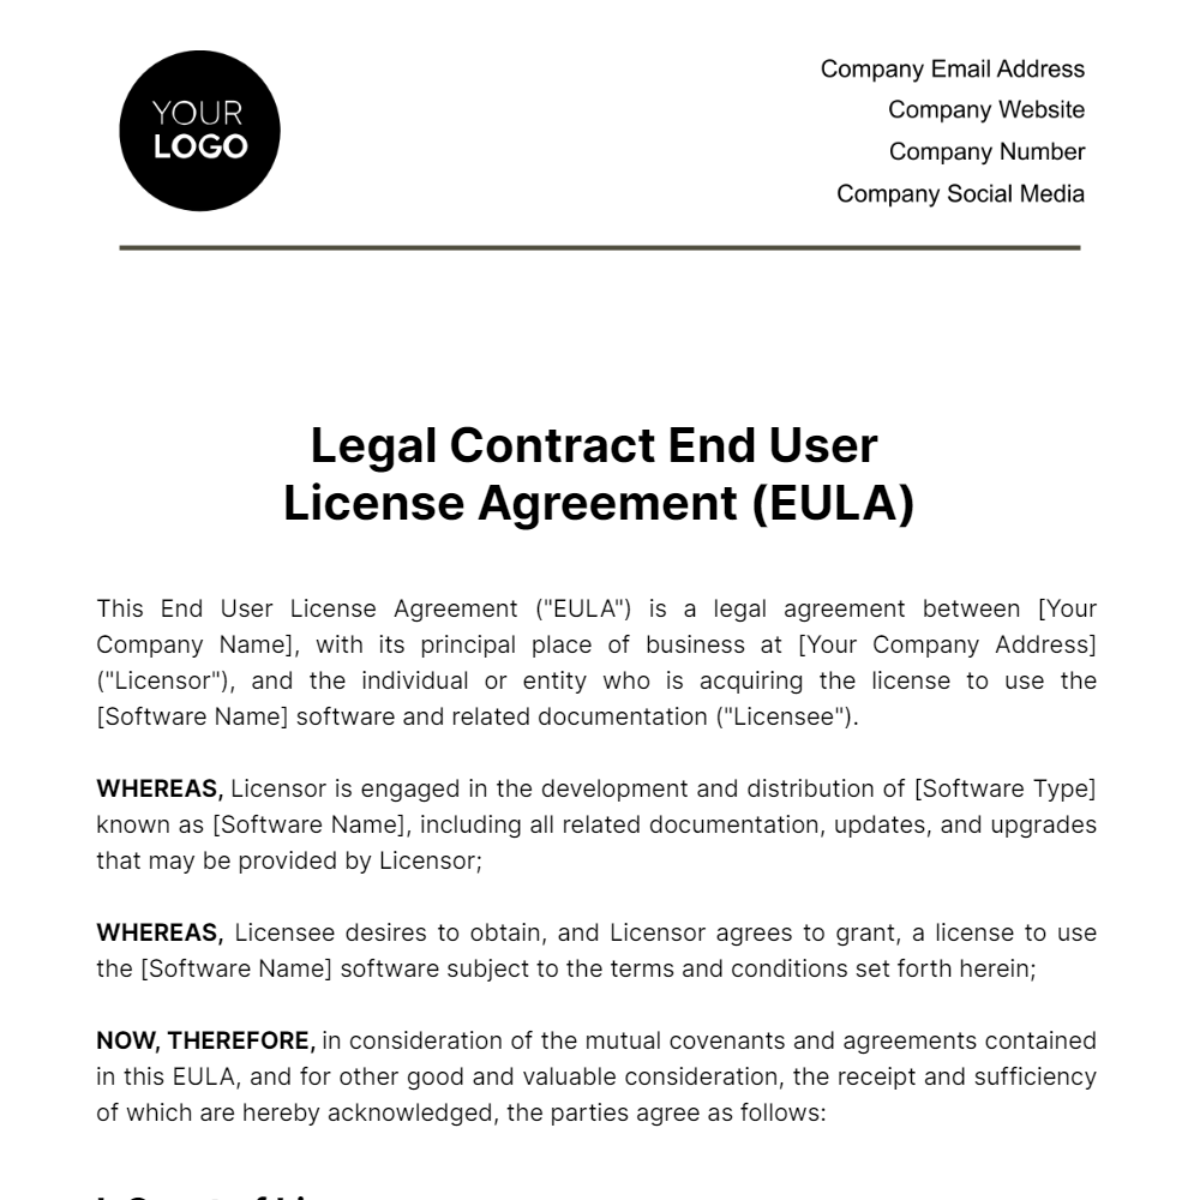 Legal Contract End User License Agreement (EULA) Template